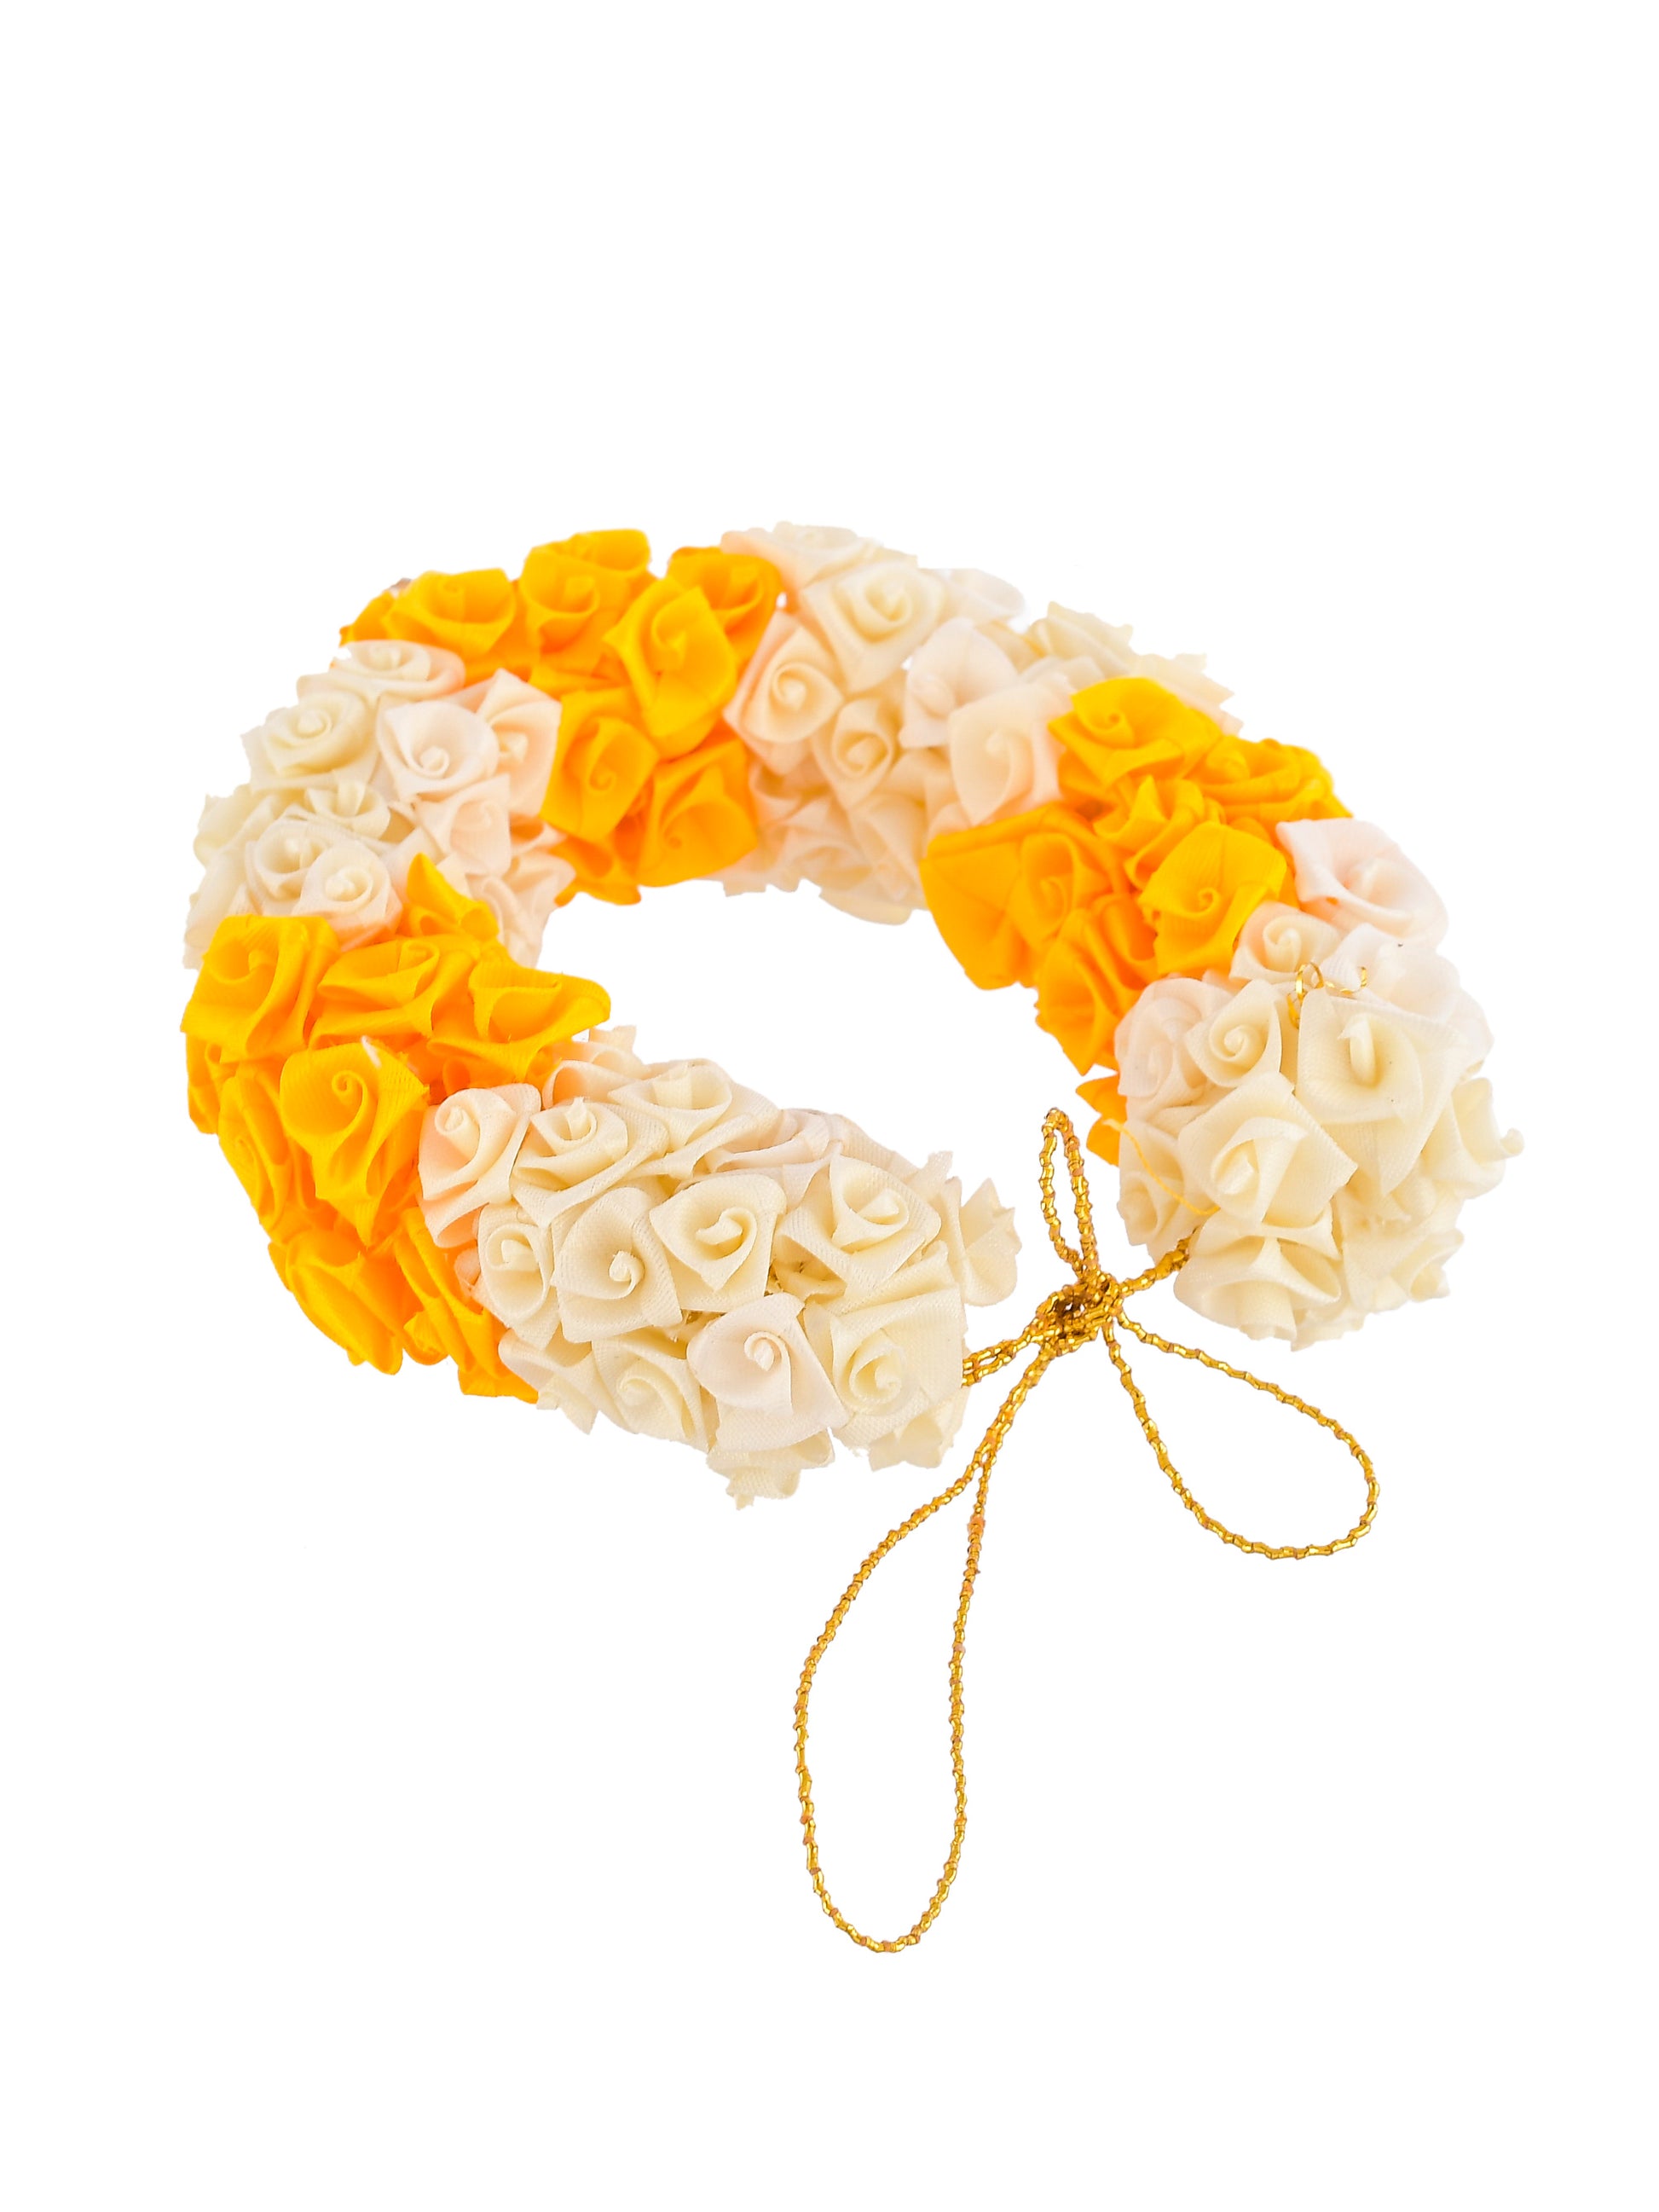 Yellow and White Ribbon Floral Hair Accessory Set